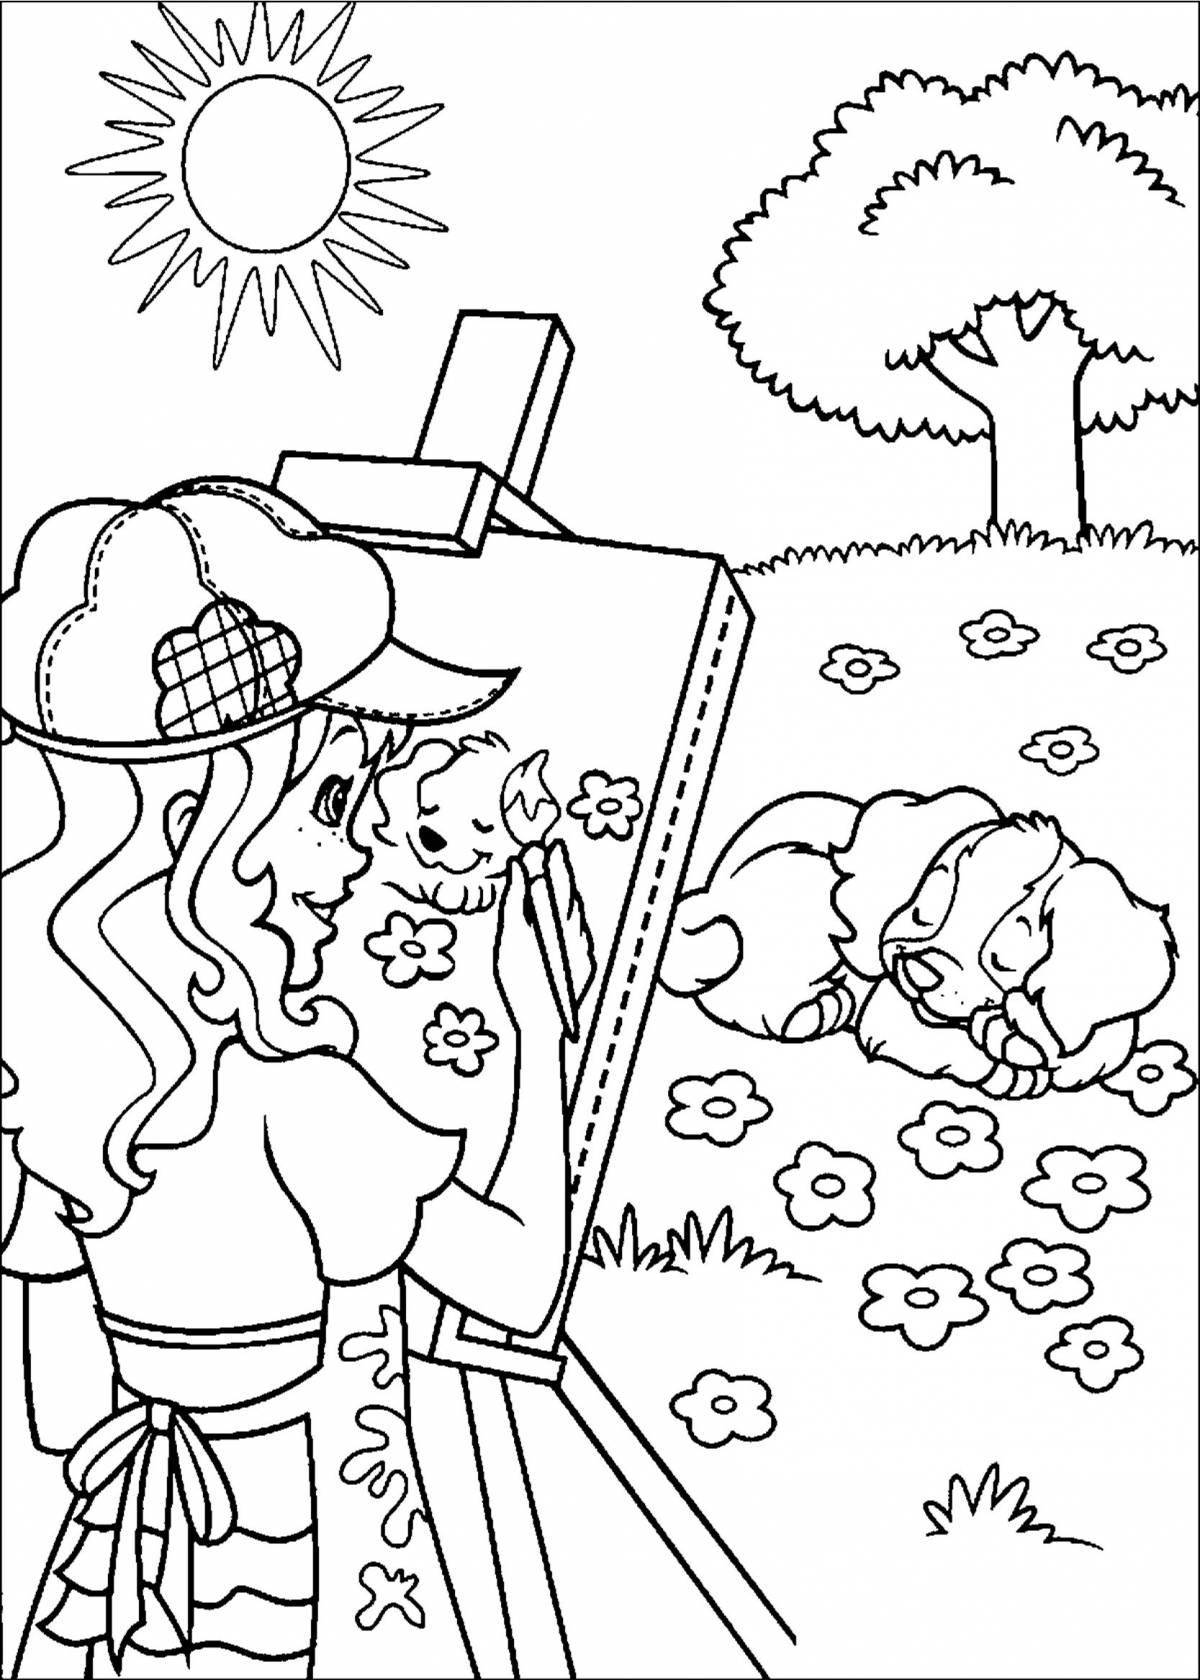 Attractive hobby coloring